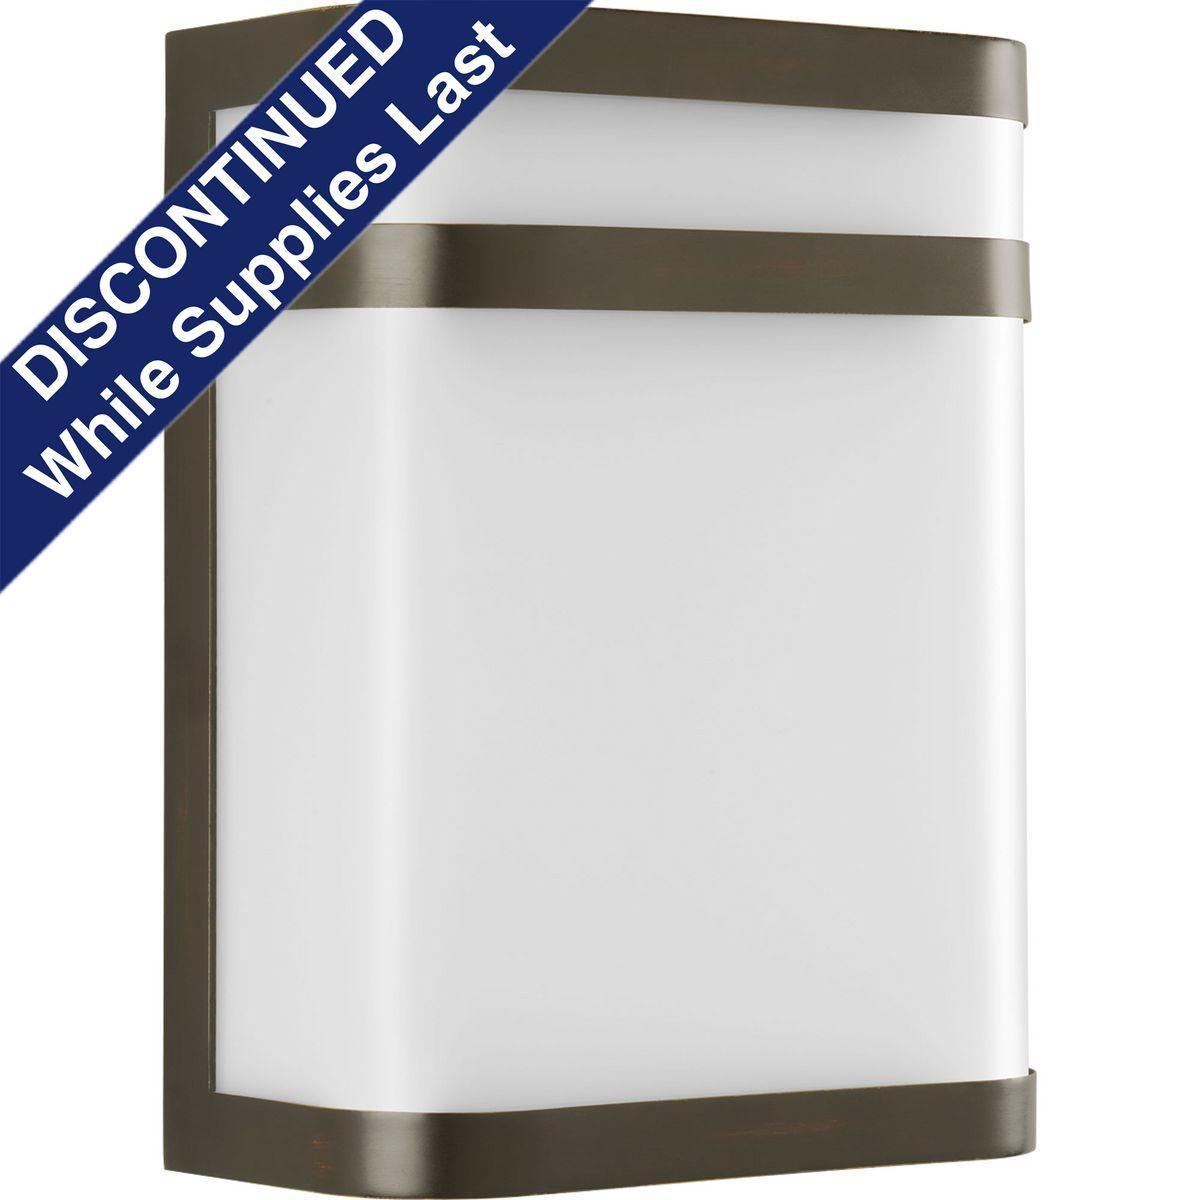 Hubbell P5801-20 One-light outdoor, energy efficient CFL medium wall lantern finished in Antique Bronze.  ; Antique Bronze finish. ; White acrylic diffuser. ; Energy efficient. ; Meets California Title 24. ; Wall mount - vertical only.